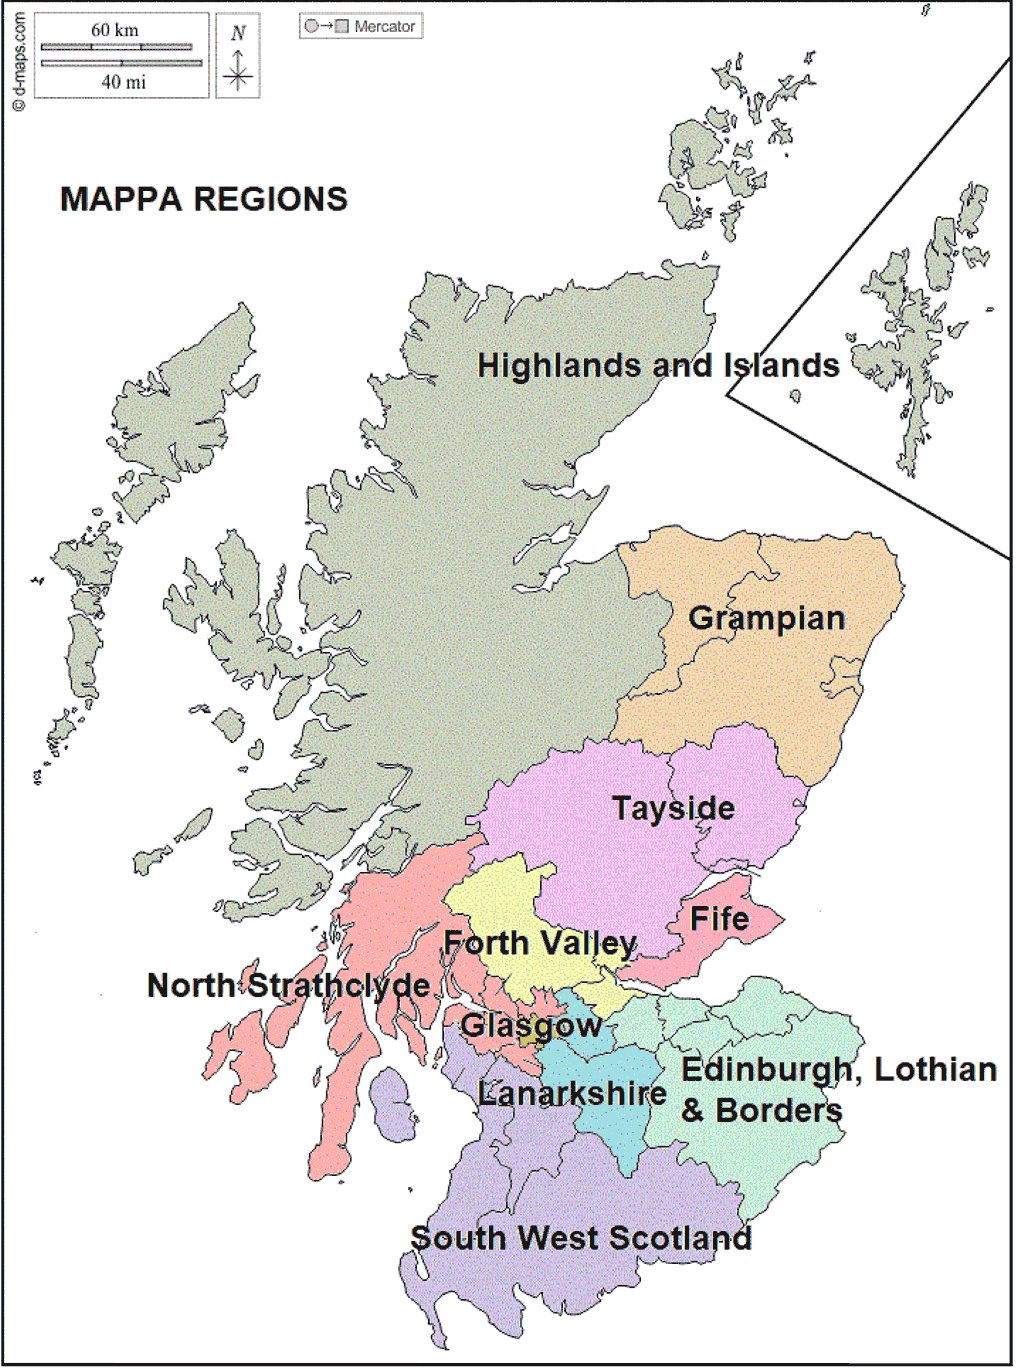 A map of the ten MAPPA regions in Scotland. From top to bottom; Highlands and Islands, Grampian, Tayside, Fife, Forth Valley, North Strathclyde, Glasgow. Lanarkshire, Edinburgh, Lothian & Borders and South West Scotland.